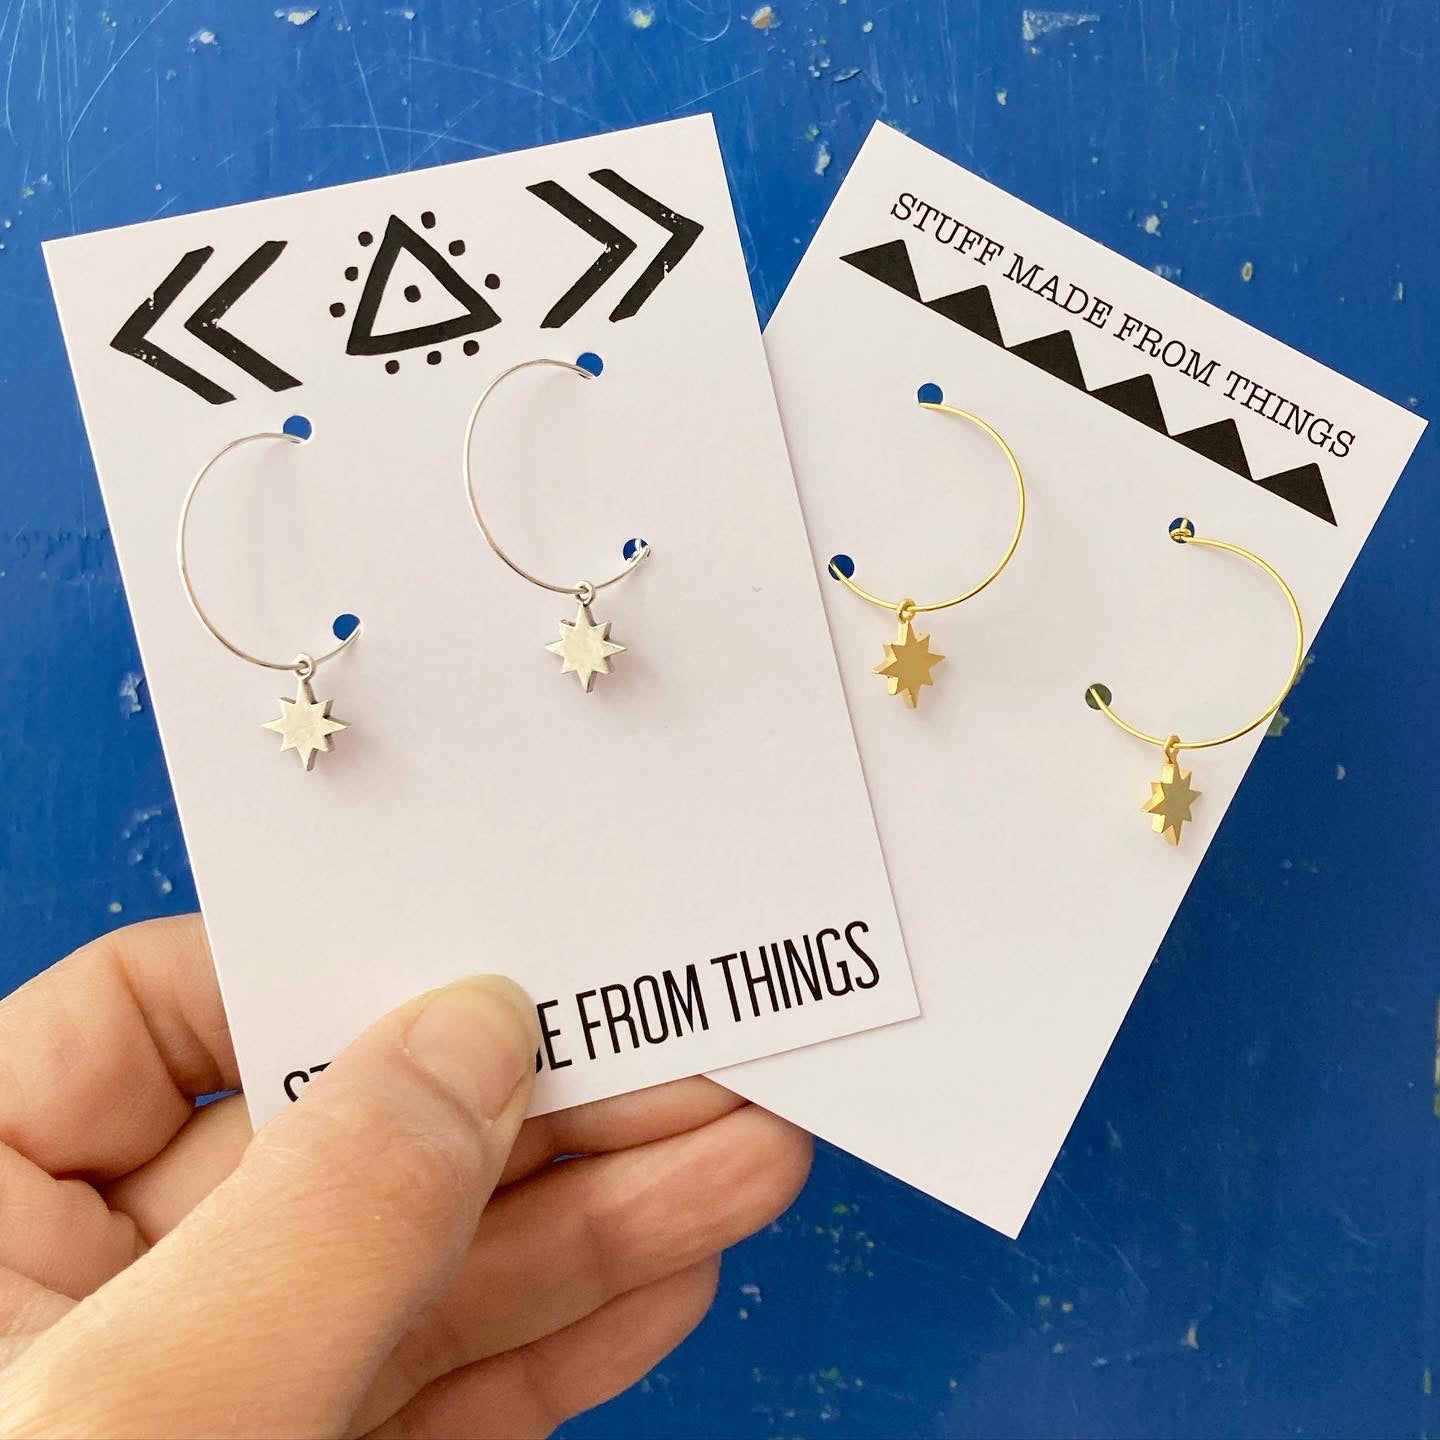 Tiny Star Hoops - Gold or Silver Plated